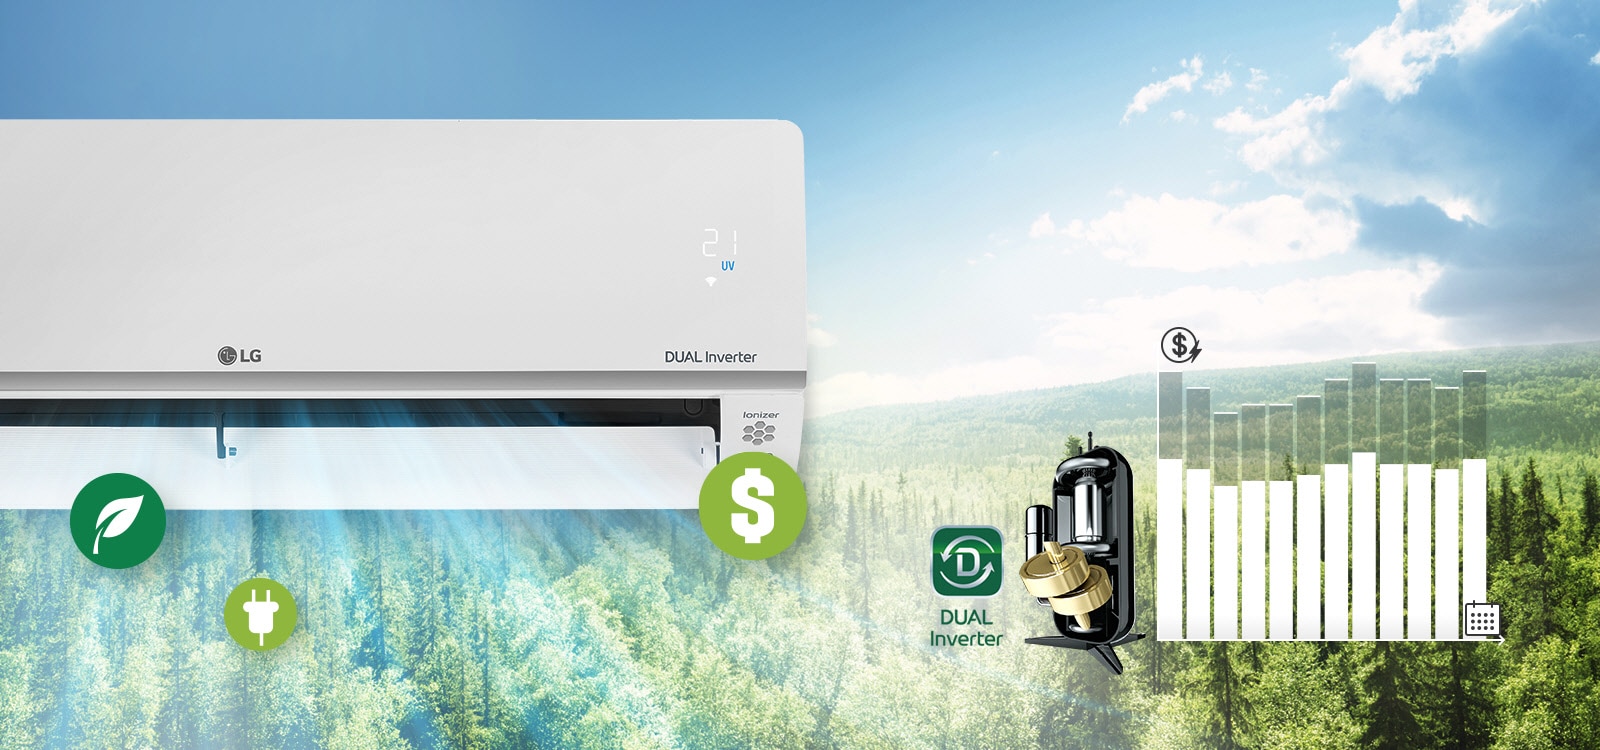 A forest landscape in the background, with the LG air conditioner on the side, half visible. The LG and Dual Inverter logos can be seen on the machine, along with the lit green air quality panel. In front of the air conditioner is the air coming out, as well as three icons representing fresh air, money and energy. To the right of the machine is the Dual Inverter logo and an image of the Dual Inverter. Further to the right is a bar chart. The bars are raised to indicate spending more money, then lowered to show that the dual inverter is saving customers money.